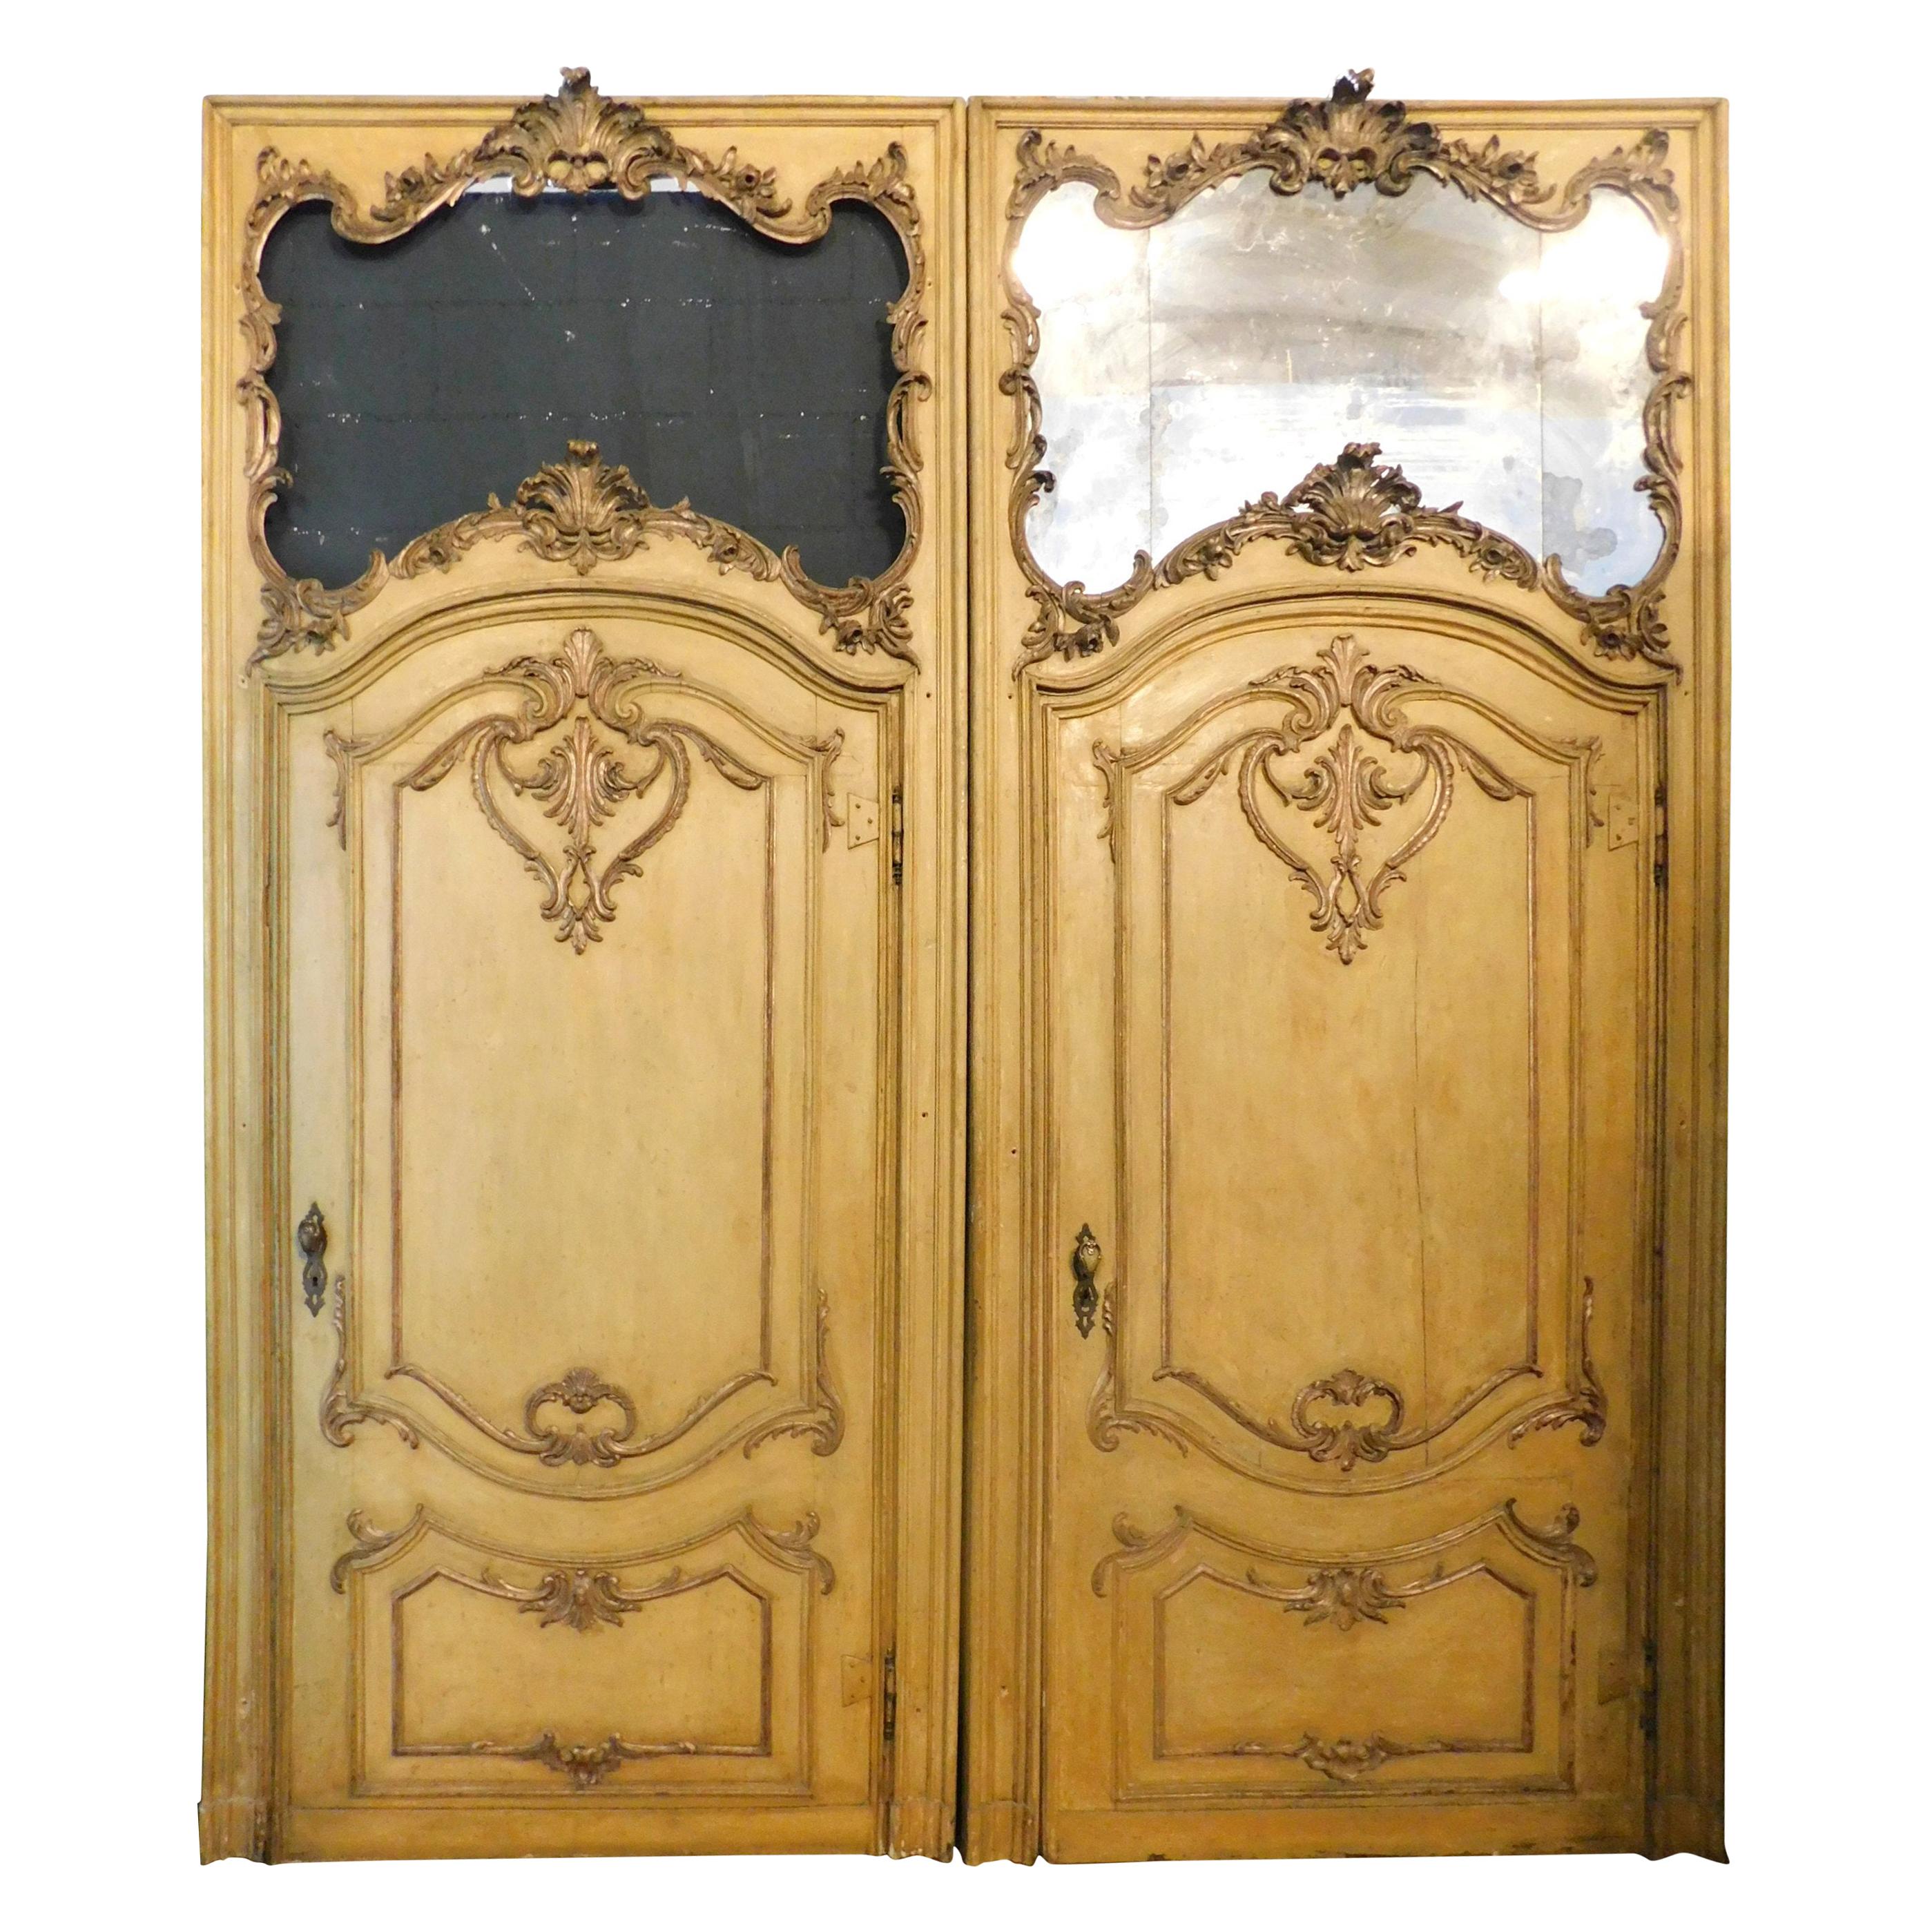 2 Antiques Baroque Doors Lacquered Yellow and Gilded, Mirror Updoor, 1700 Italy